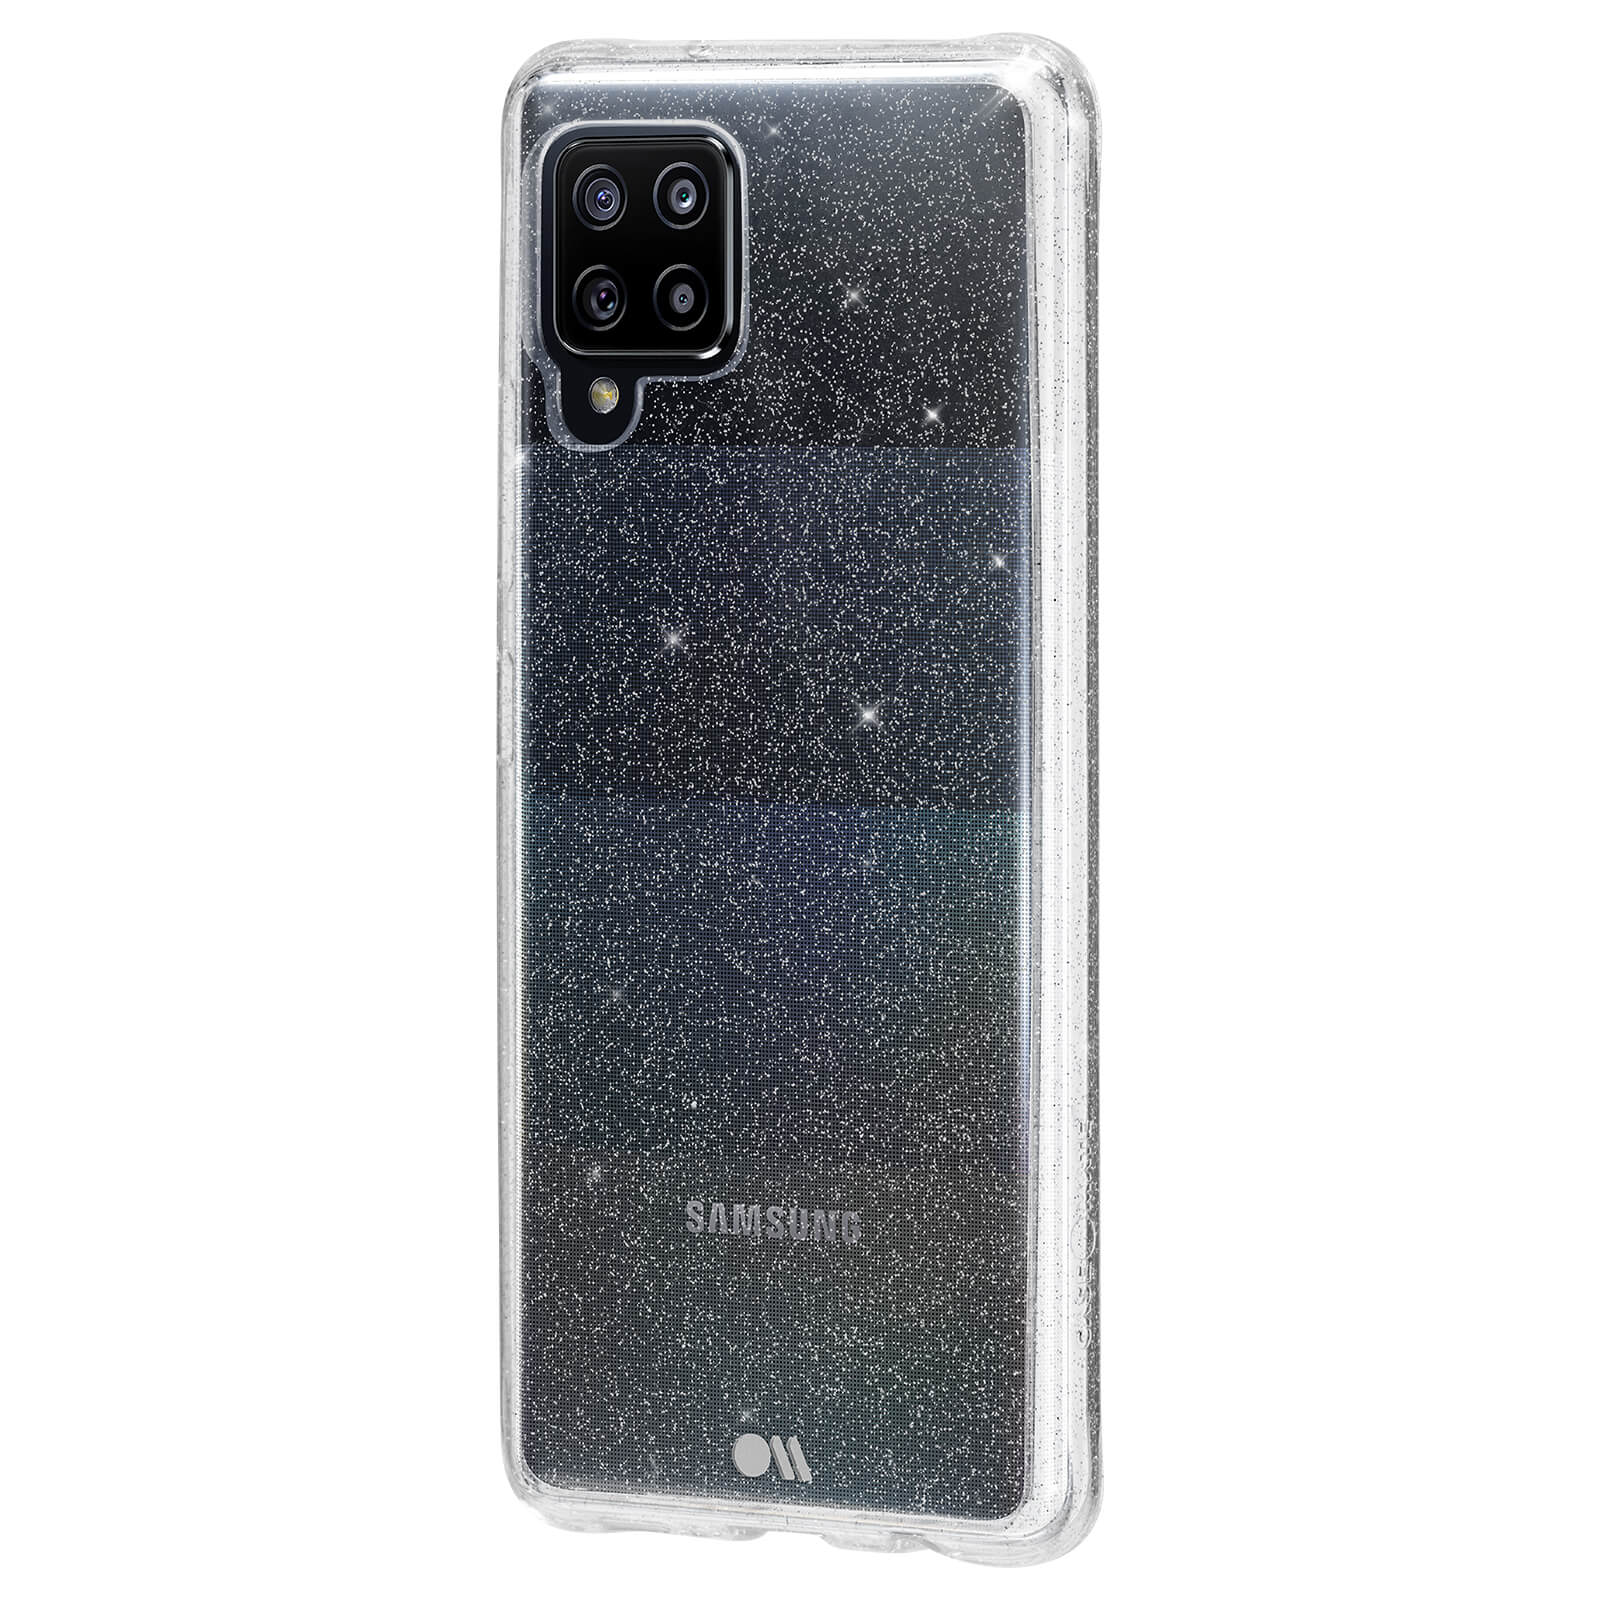 Protective case with sparkles. color::Clear